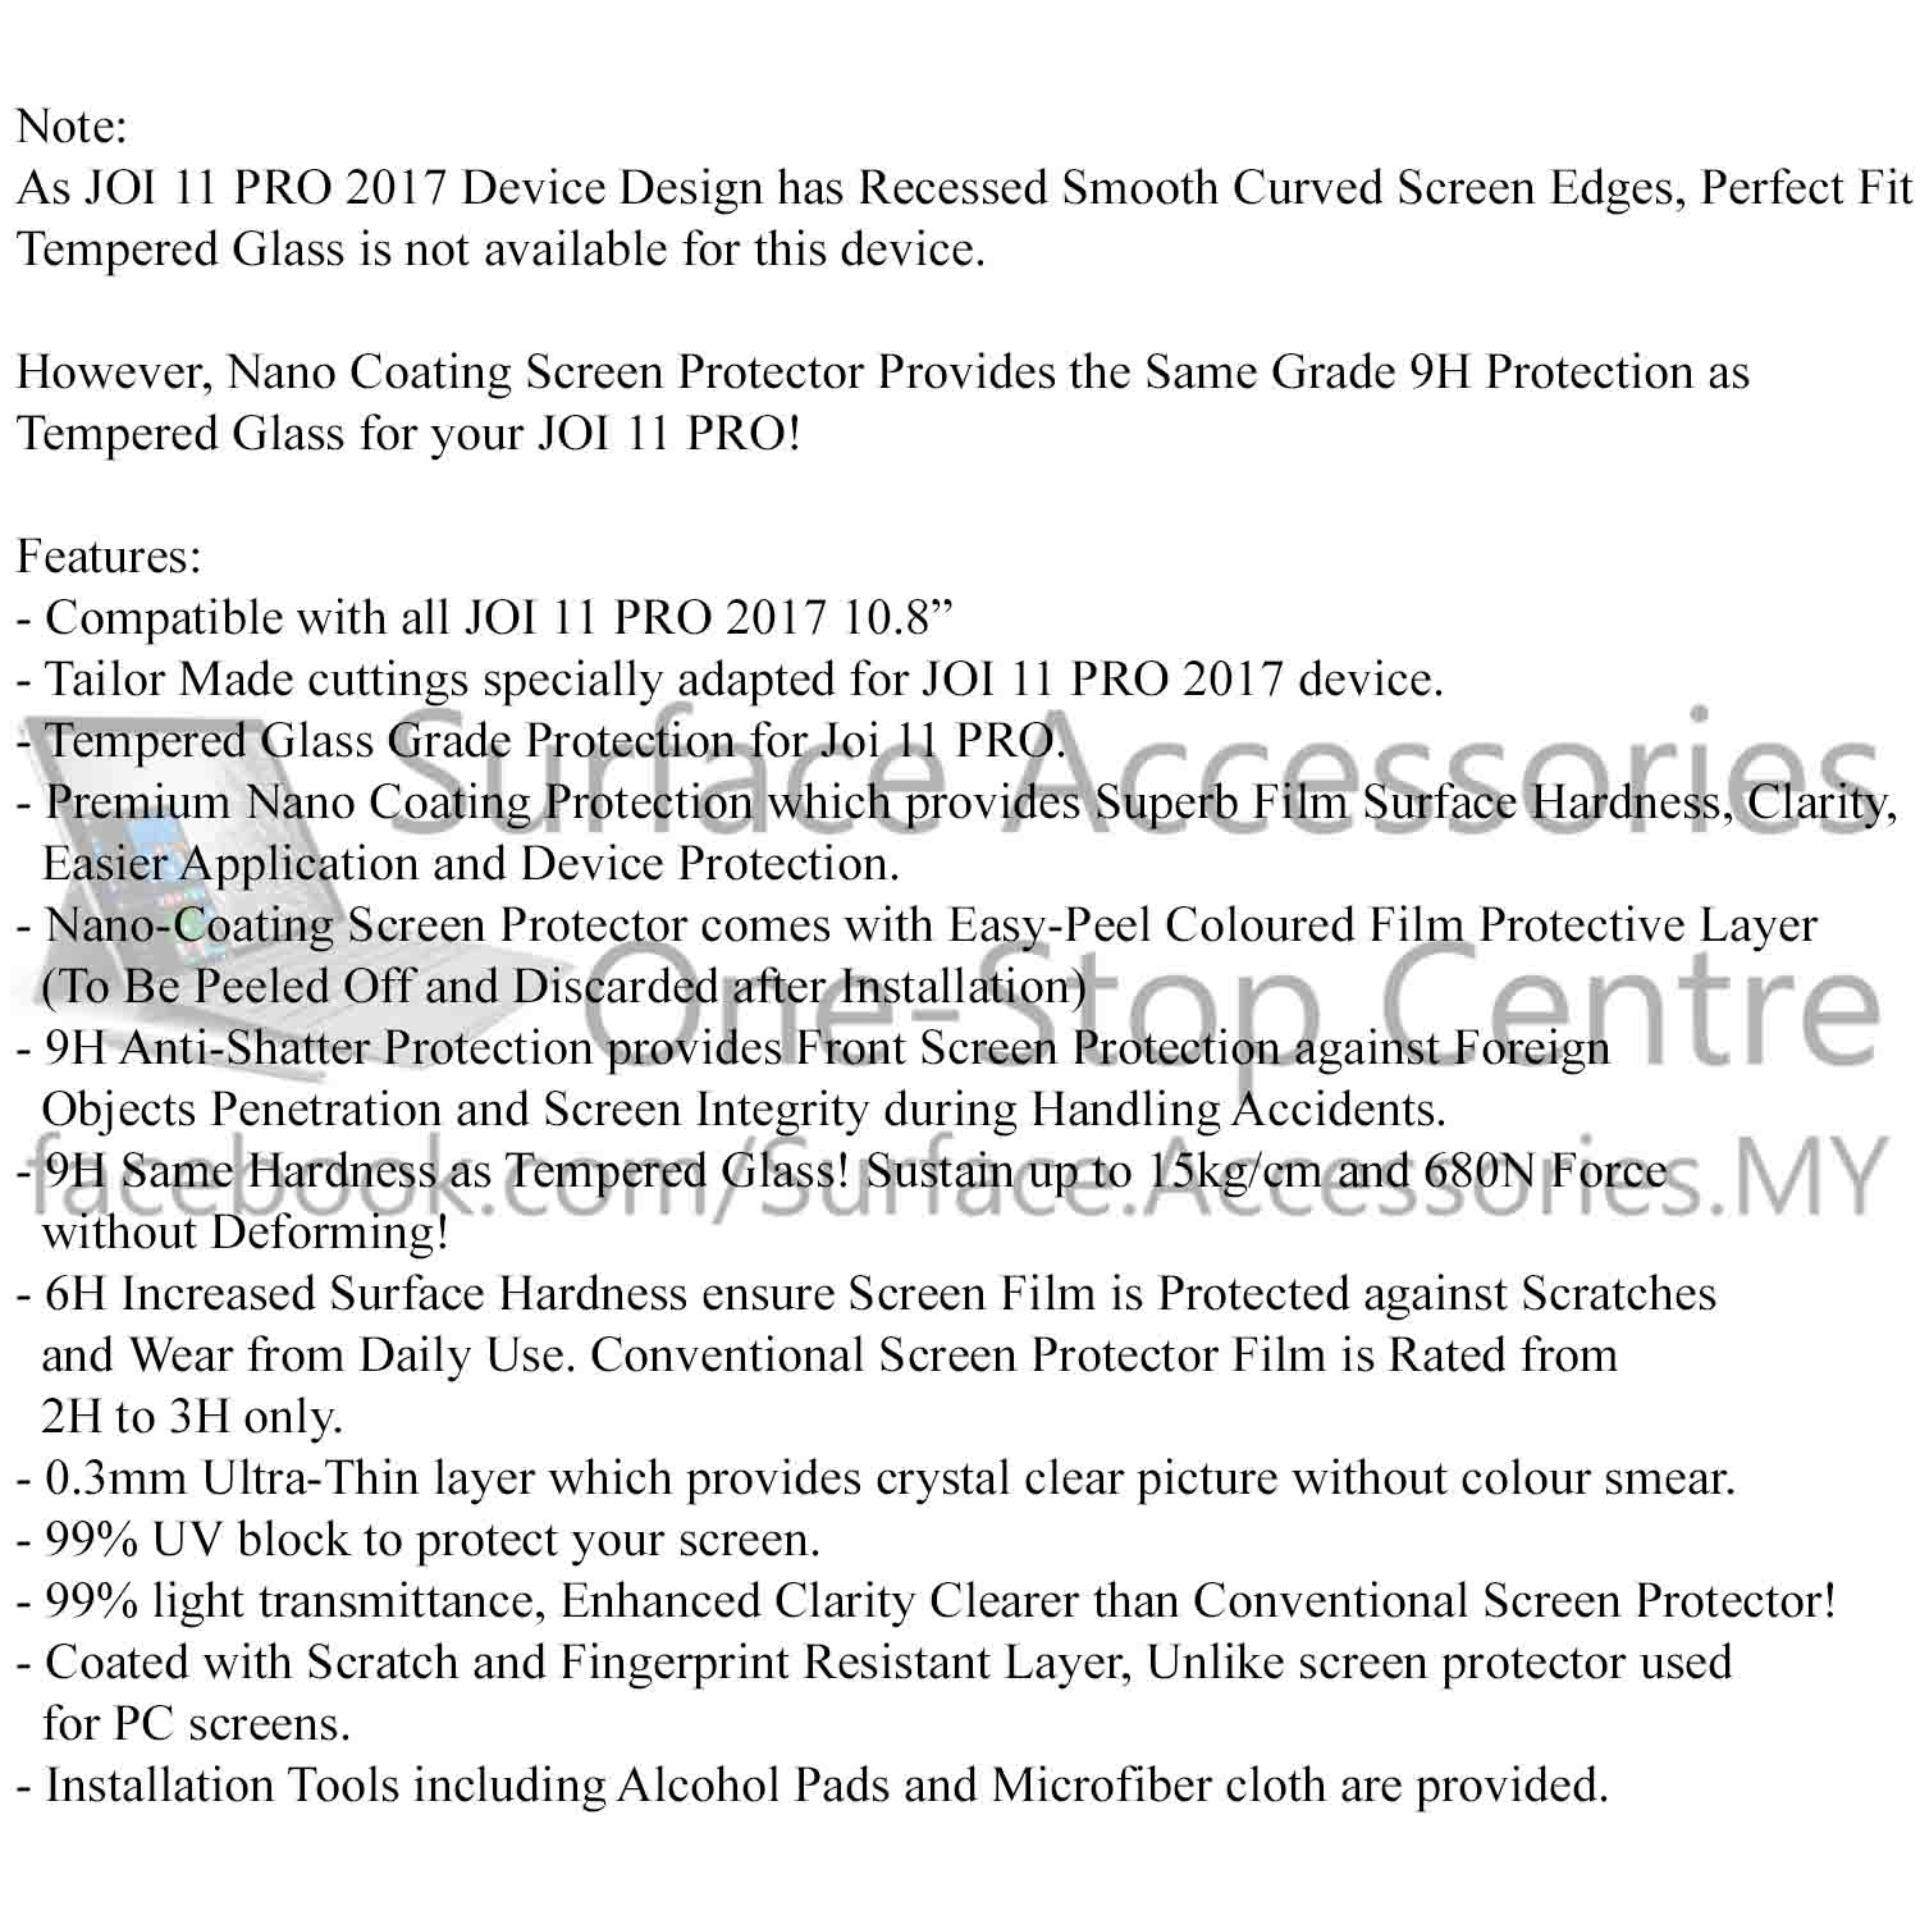 [MALAYSIA] JOI 11 PRO 2017 10.8 Screen Protector Nano Coating 6H Surface Hardness 9H Anti Shatter Film Protection TEMPERED GLASS GRADE